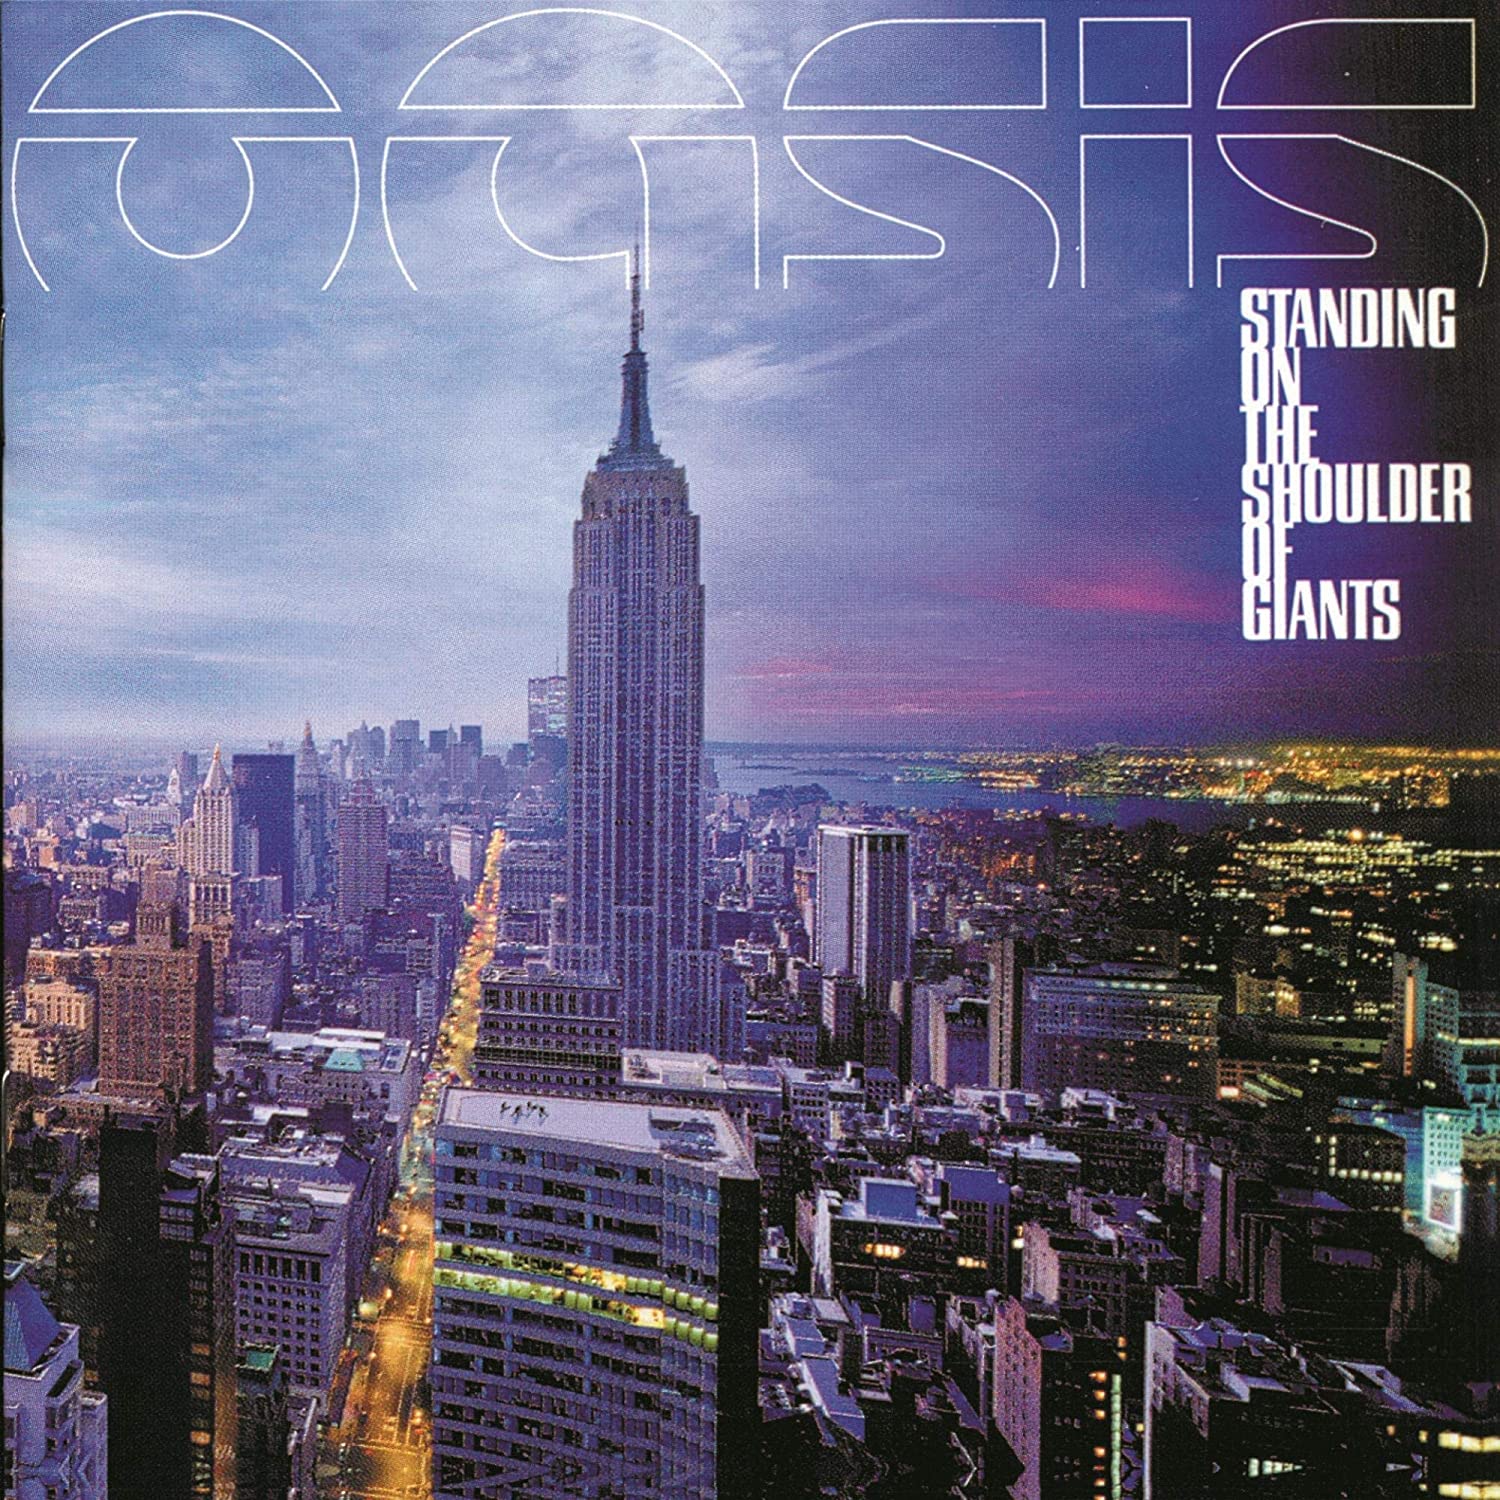 Oasis "Standing on the Shoulder of Giants" LP